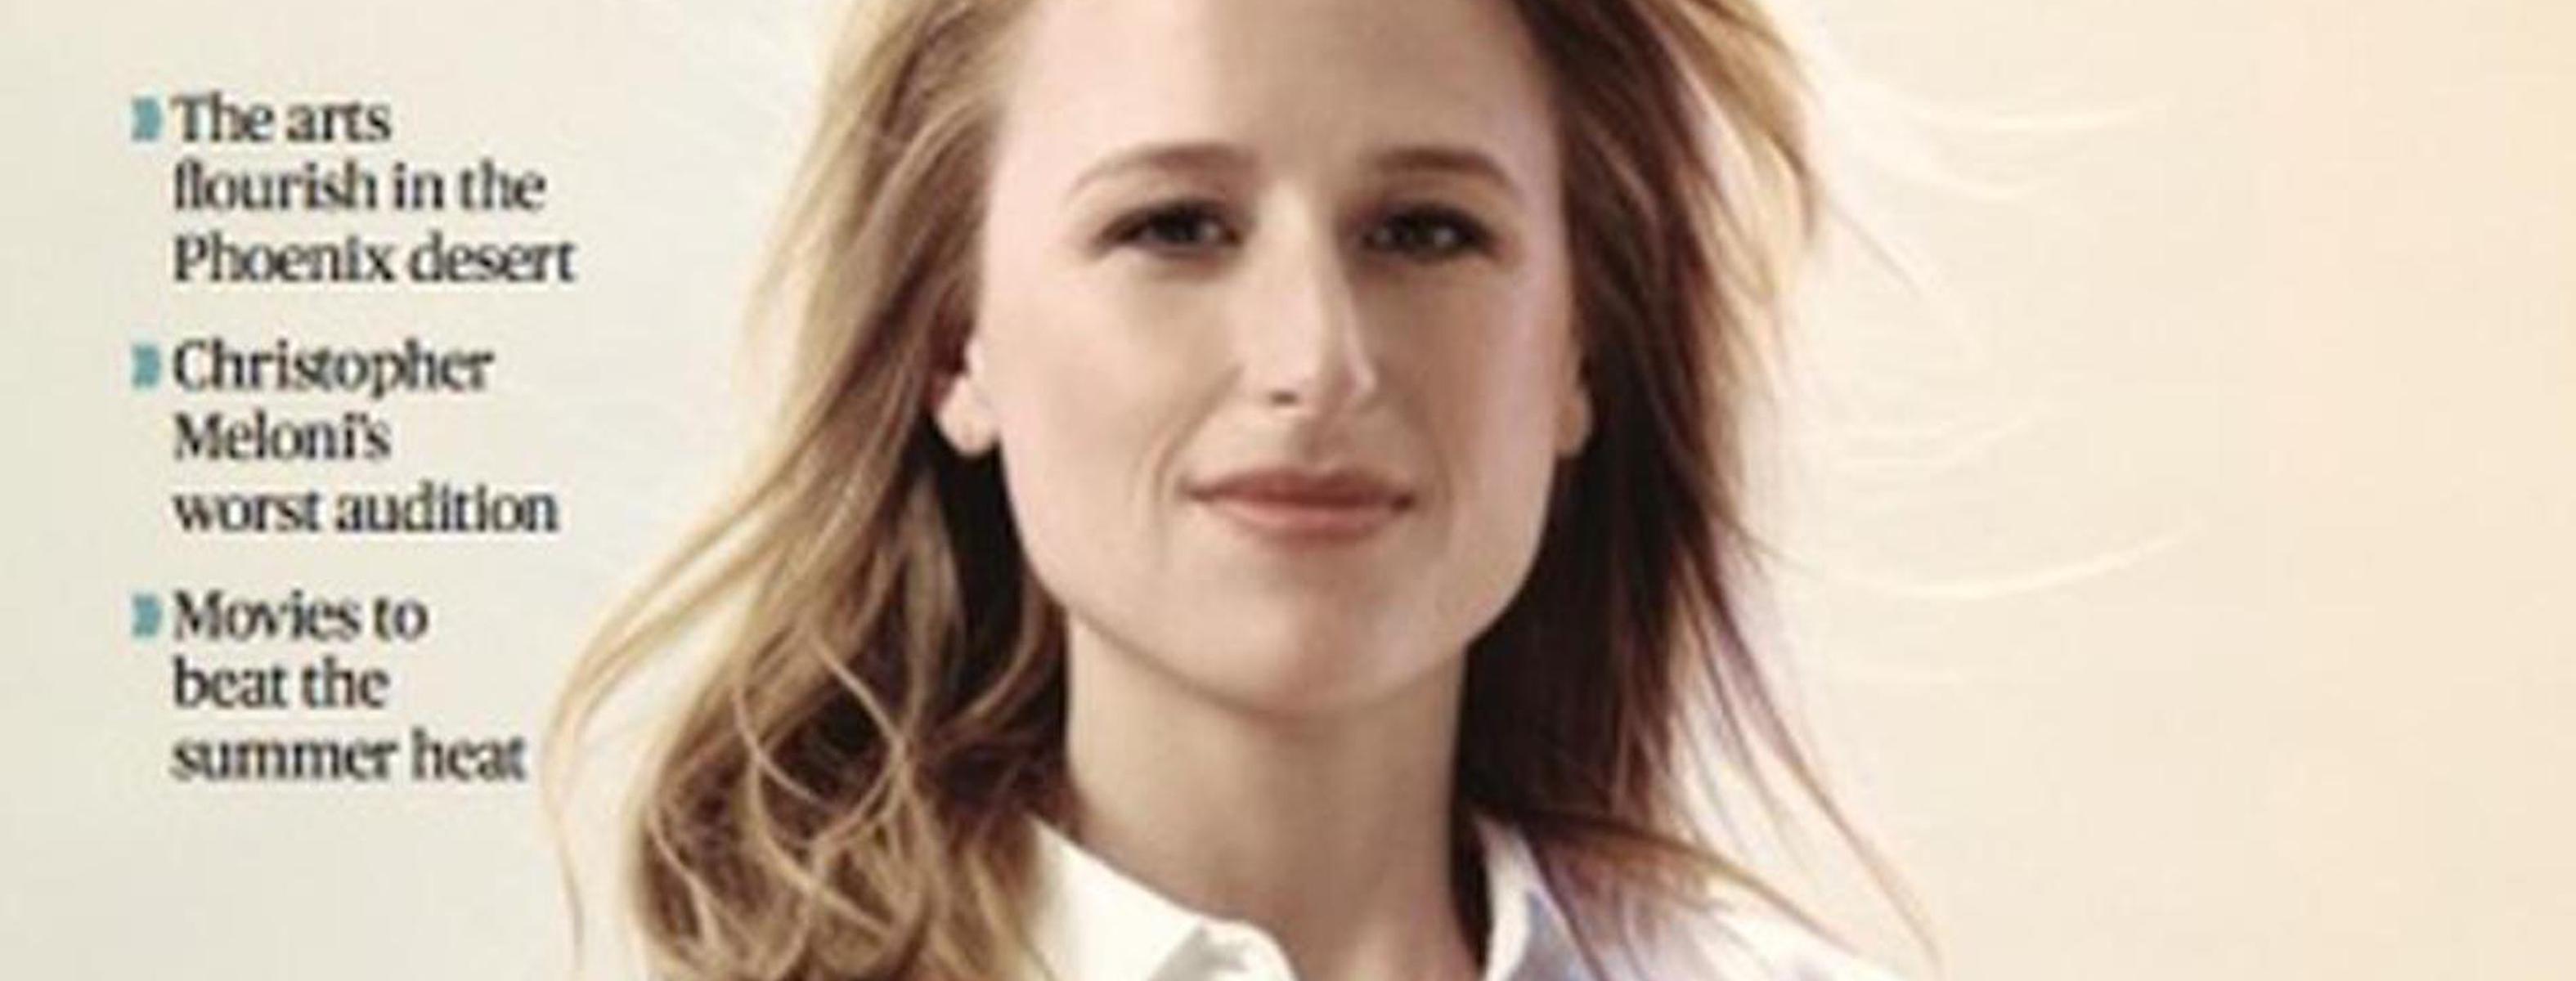 Mamie Gummer is forging her own path - Los Angeles Times